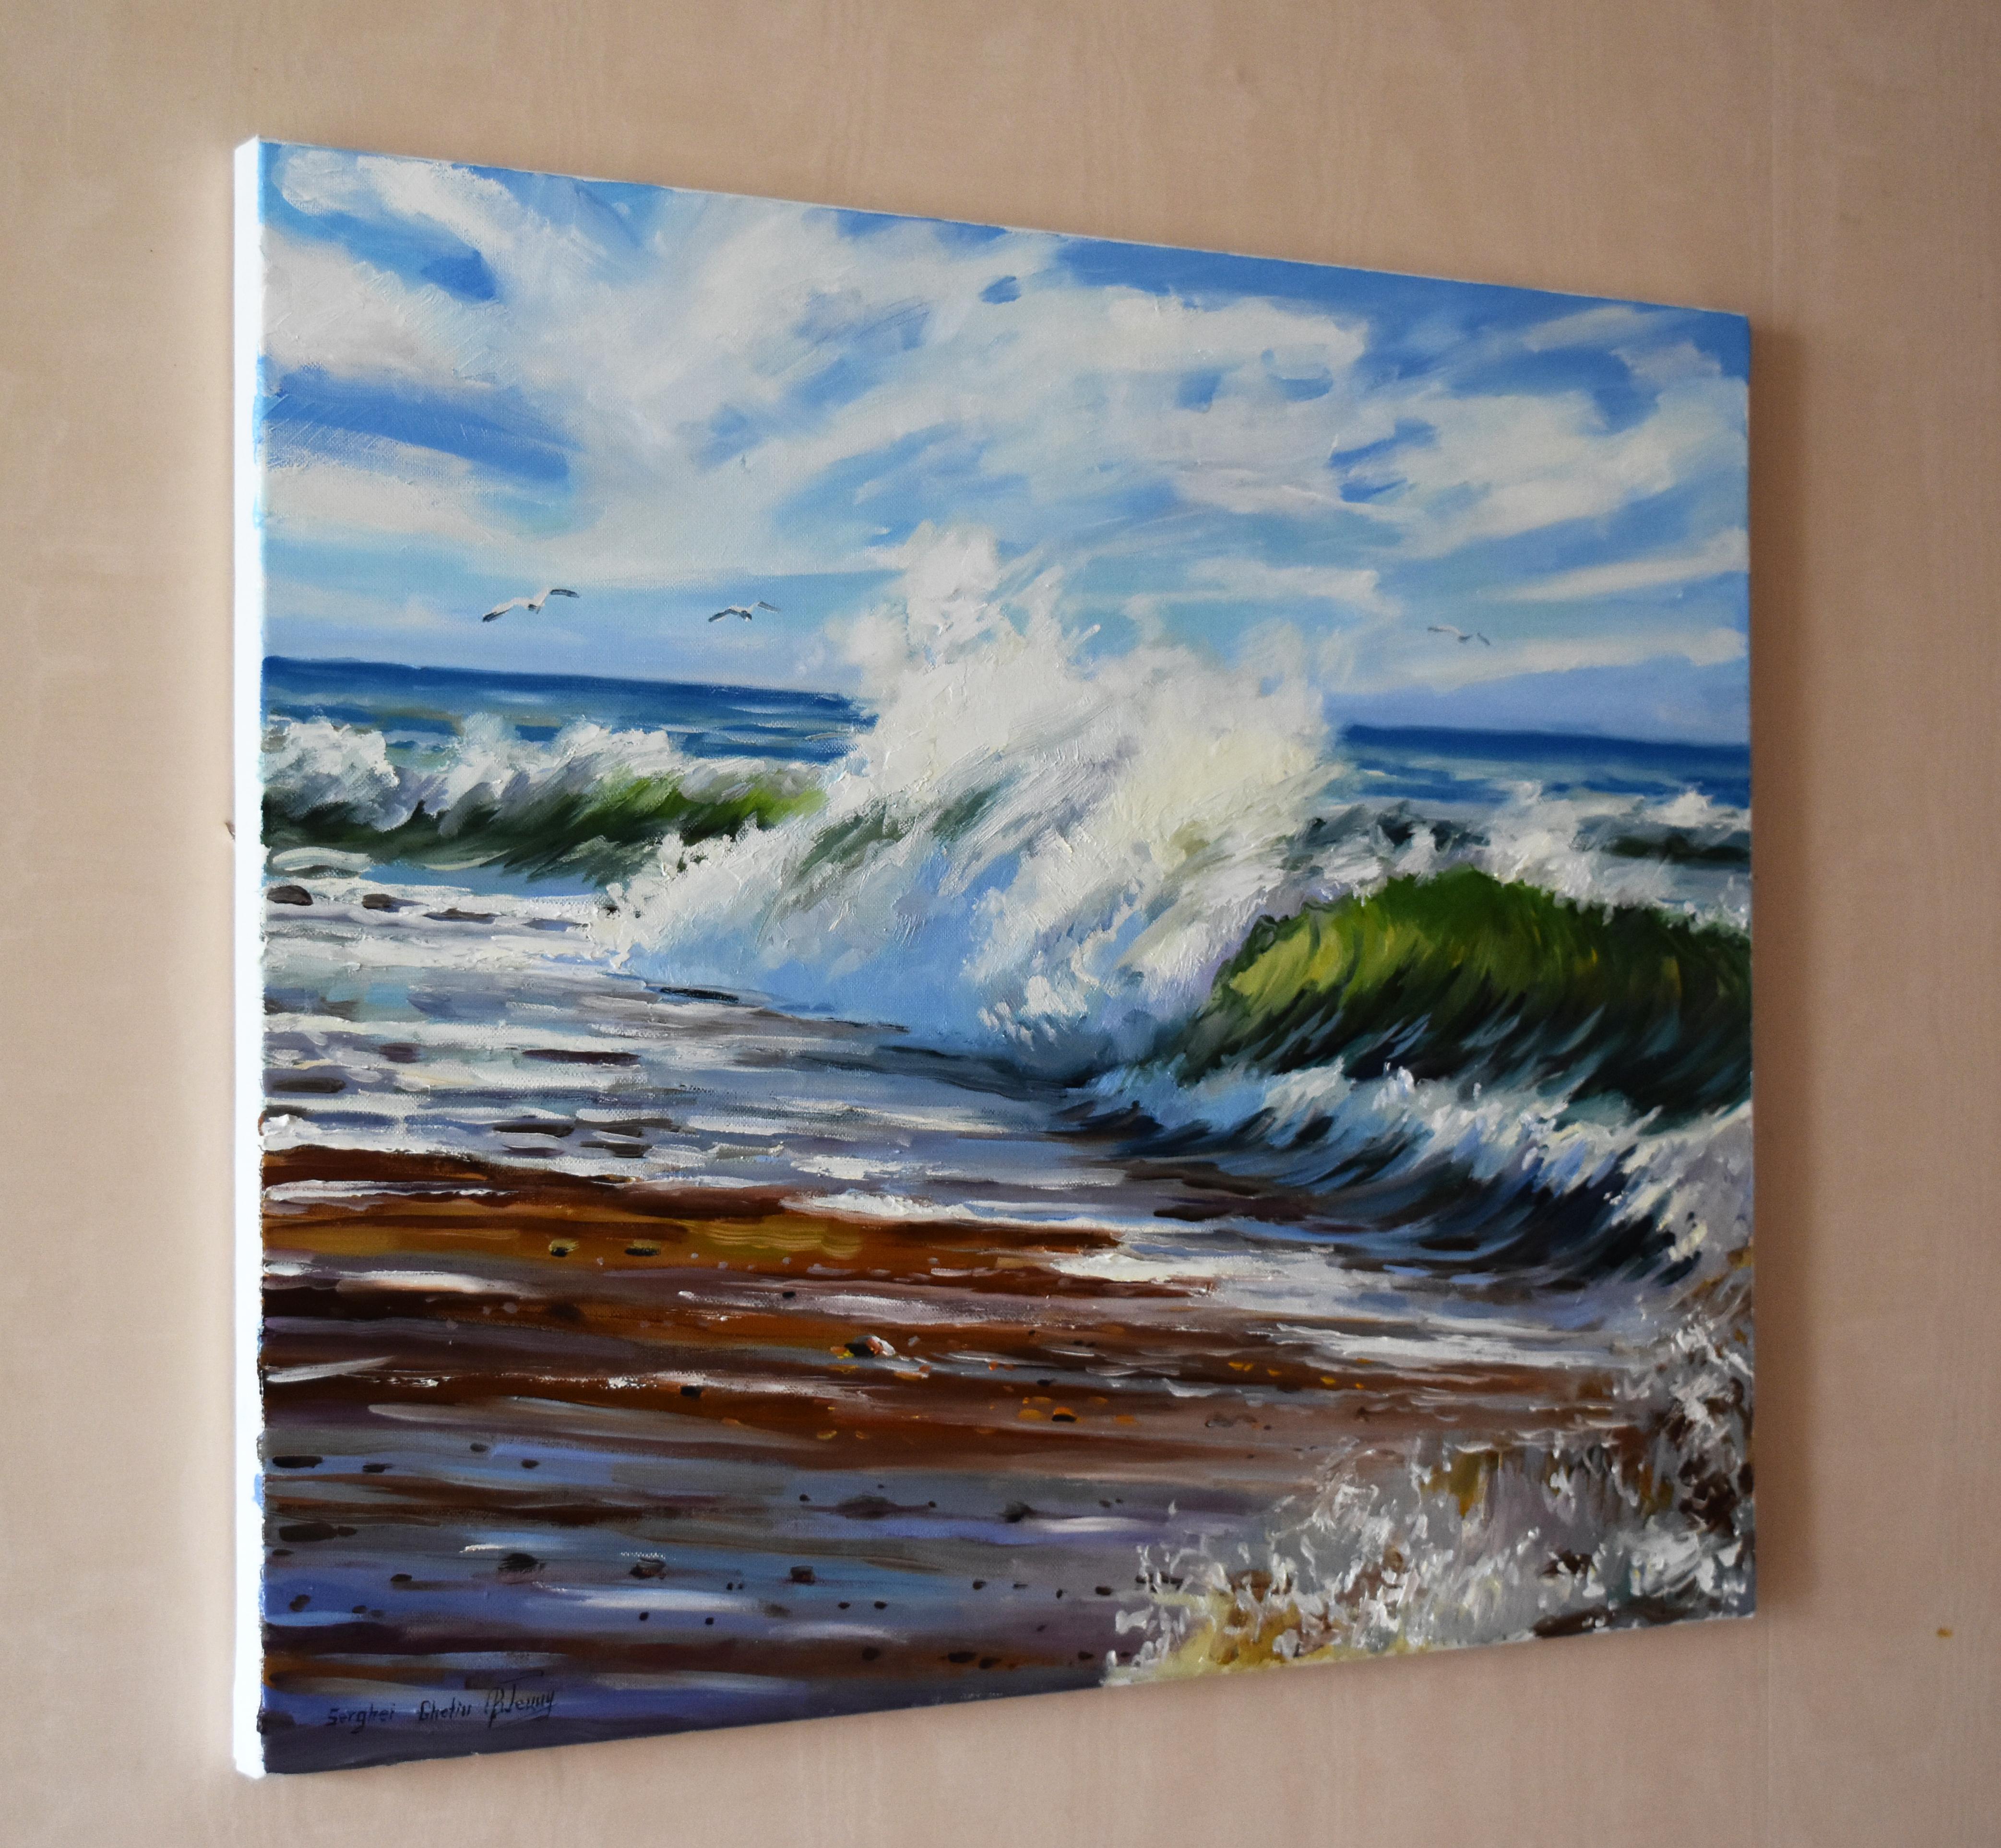 A beautiful impressionistic seascape with crushing waves. Just sit and watch this miracle of nature. Professional paints on linen canvas. For lovers of fresh sea wind and waves.